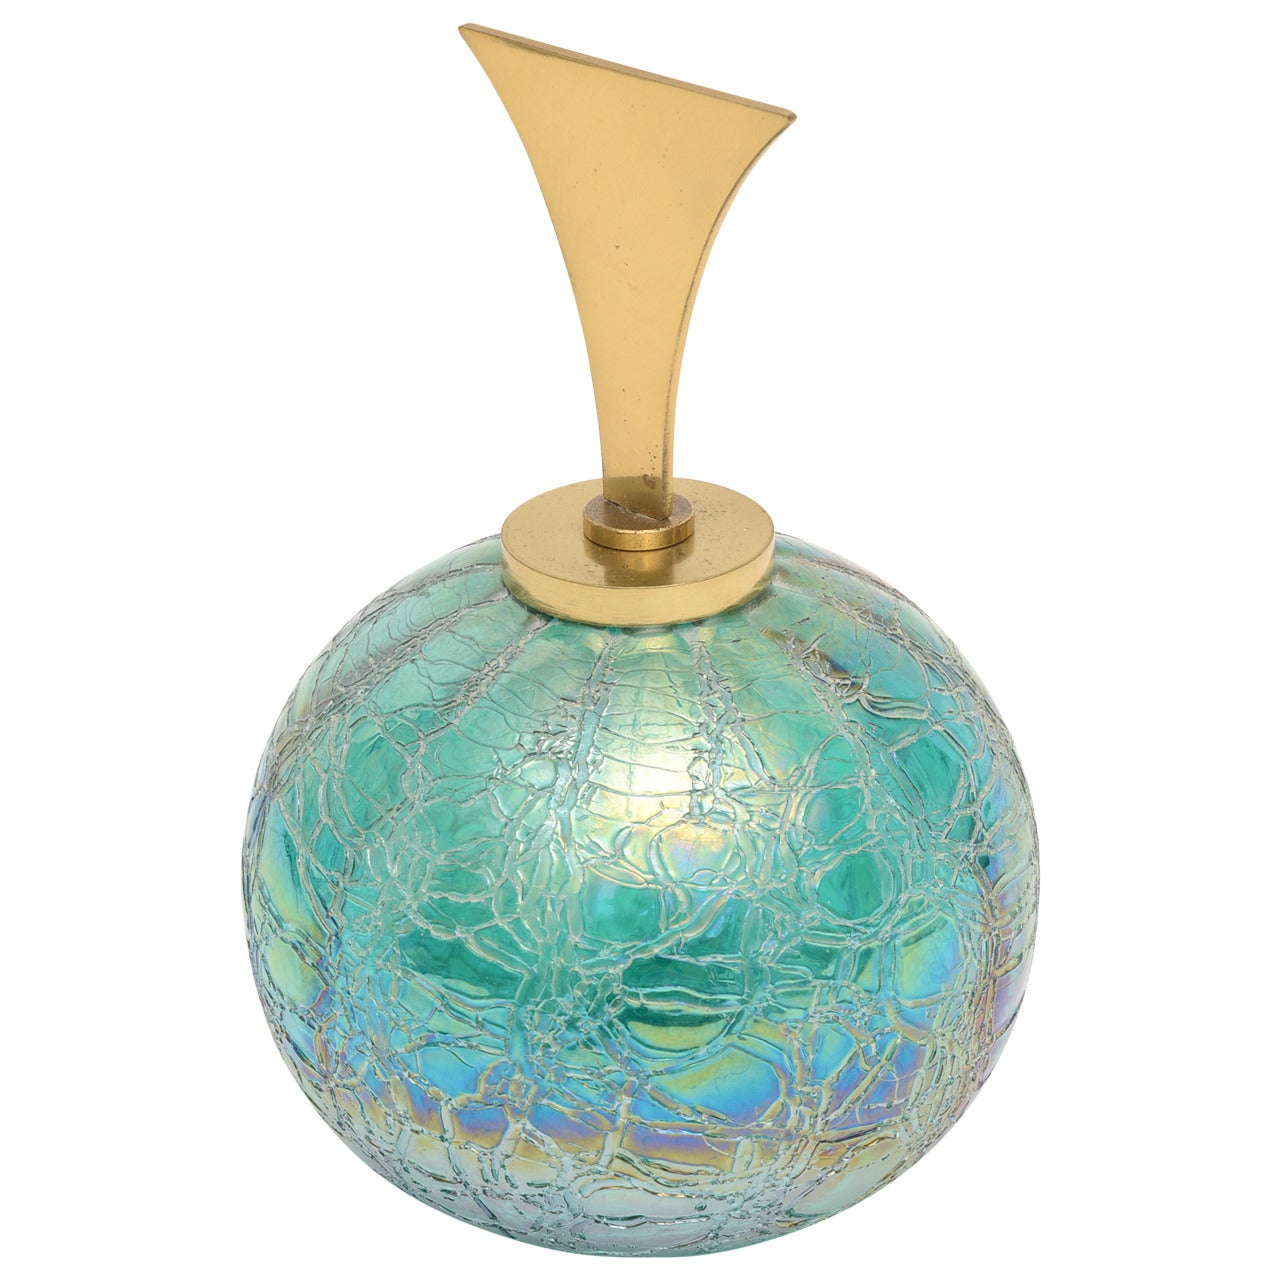 Tiffany Style Favrile Glass Irredescent Glass Ball with Brass Stopper